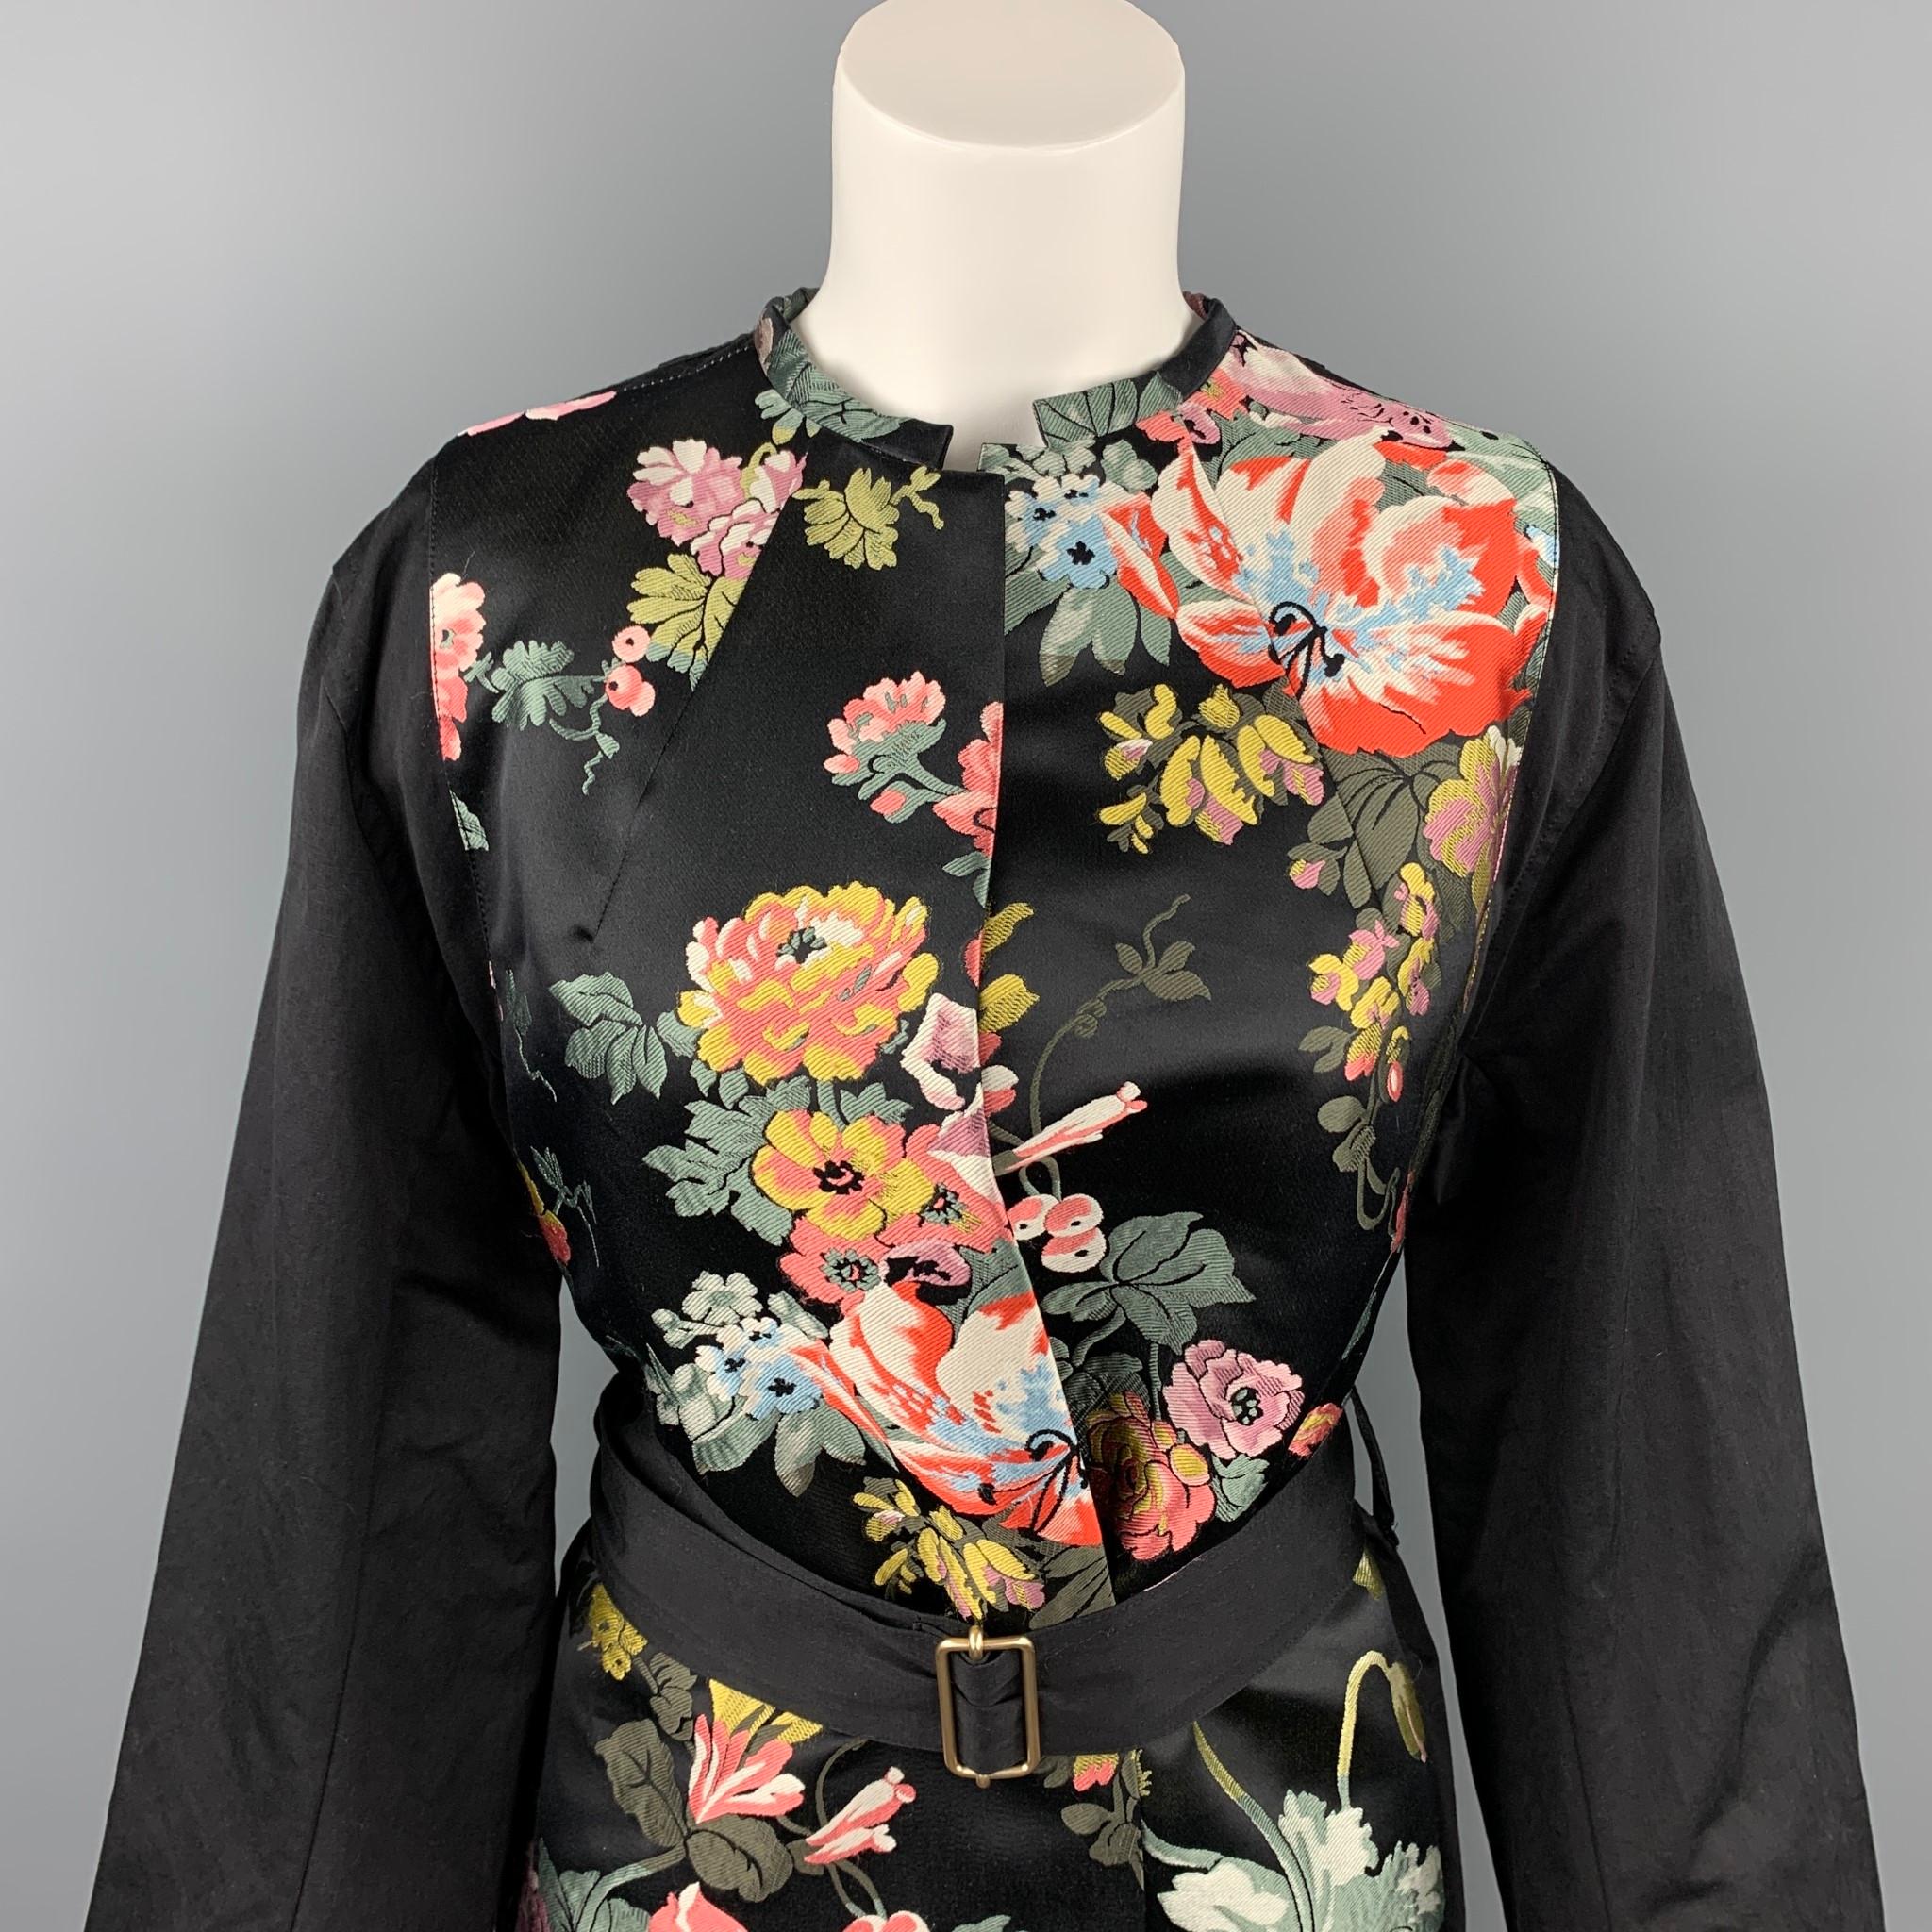 DRIES VAN NOTEN coat comes in a black silk / polyester with a multi-color jacquard design featuring a belted style, slit pockets, and a open front. 

Very Good Pre-Owned Condition.
Marked: 36

Measurements:

Shoulder: 17 in.
Bust: 38 in.
Sleeve: